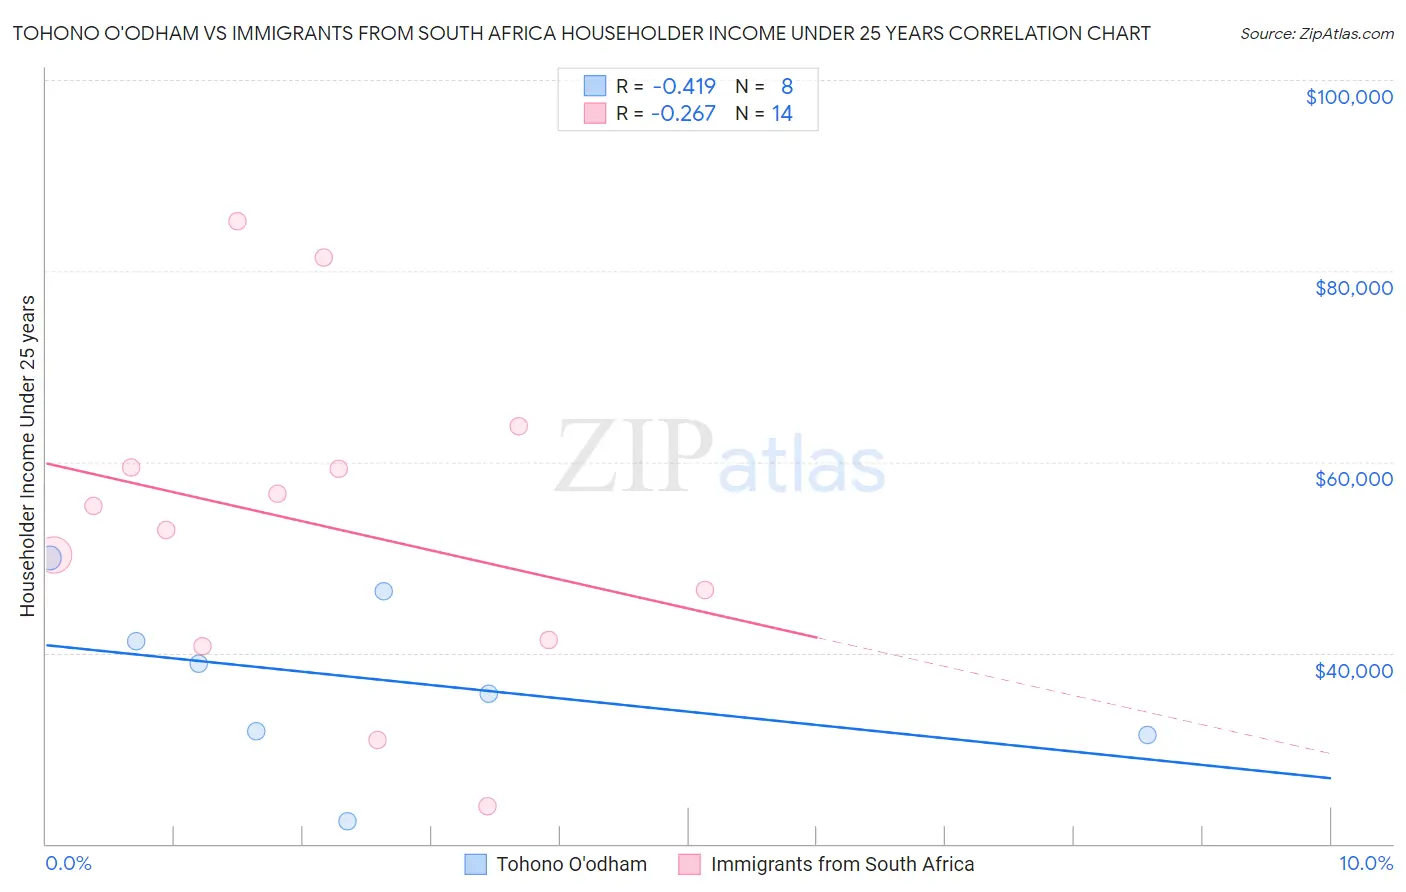 Tohono O'odham vs Immigrants from South Africa Householder Income Under 25 years